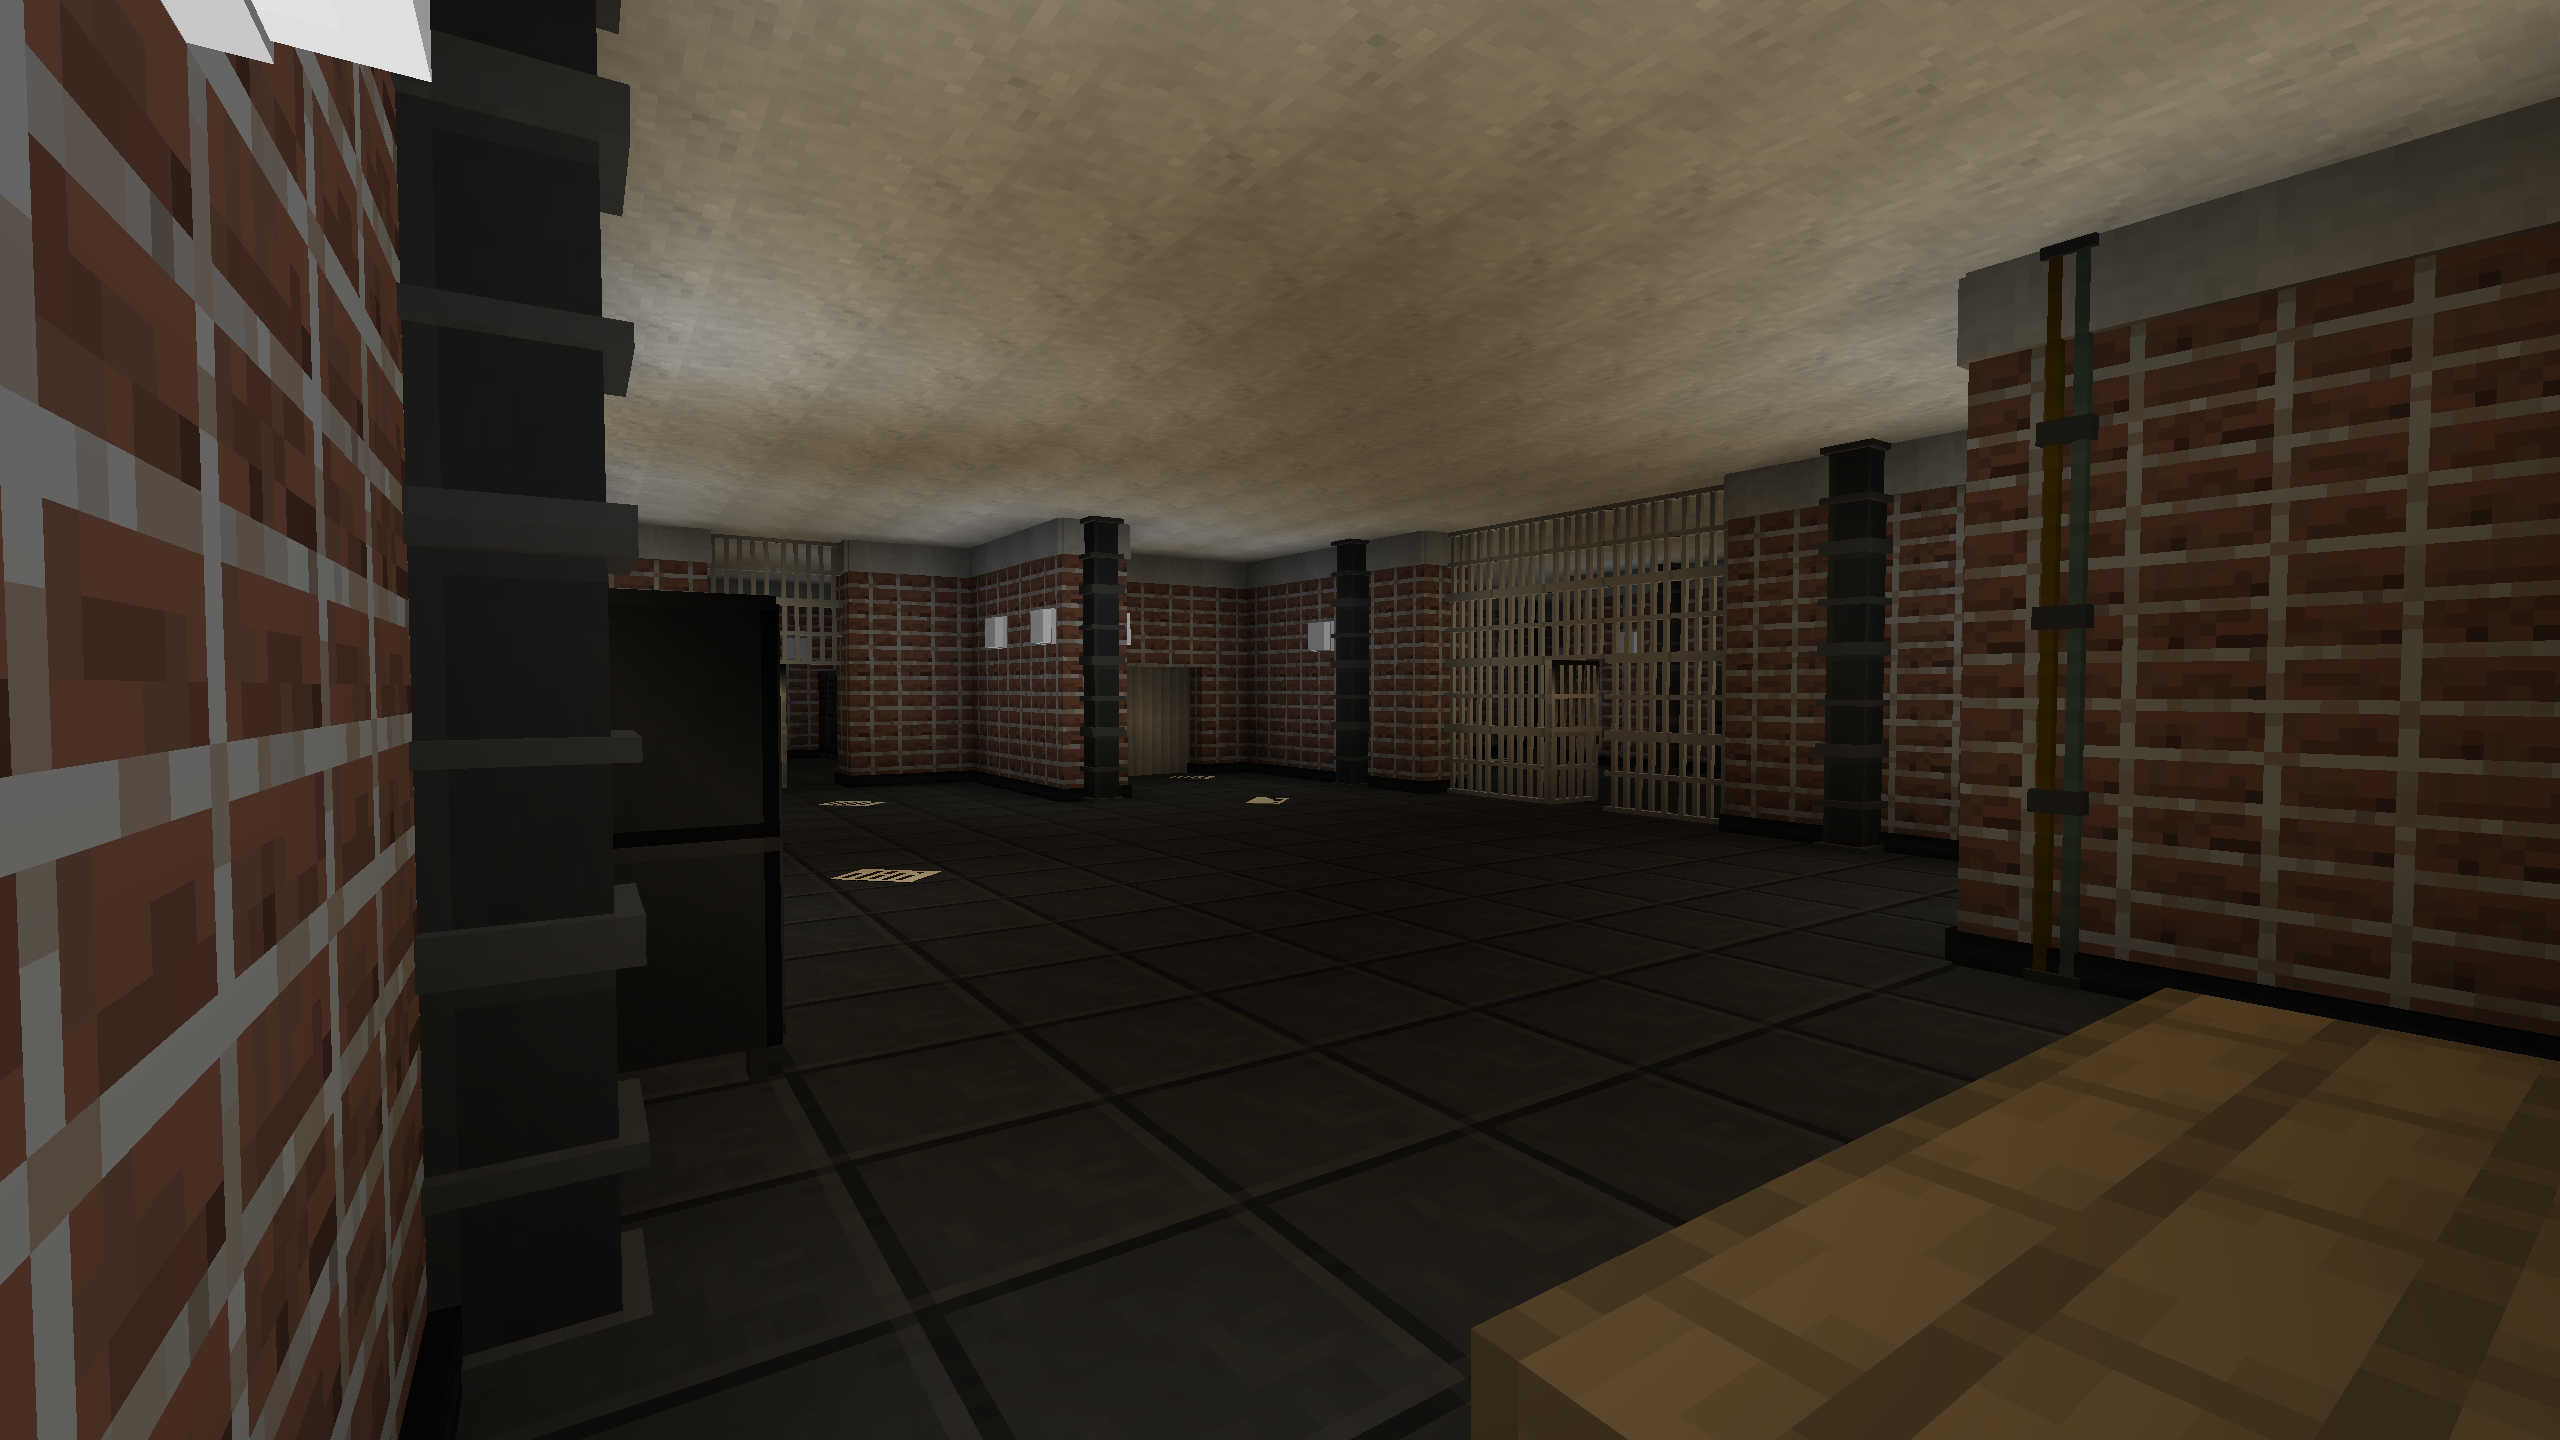 The Backrooms Mod (by Loxor04) - Minecraft Mods - CurseForge